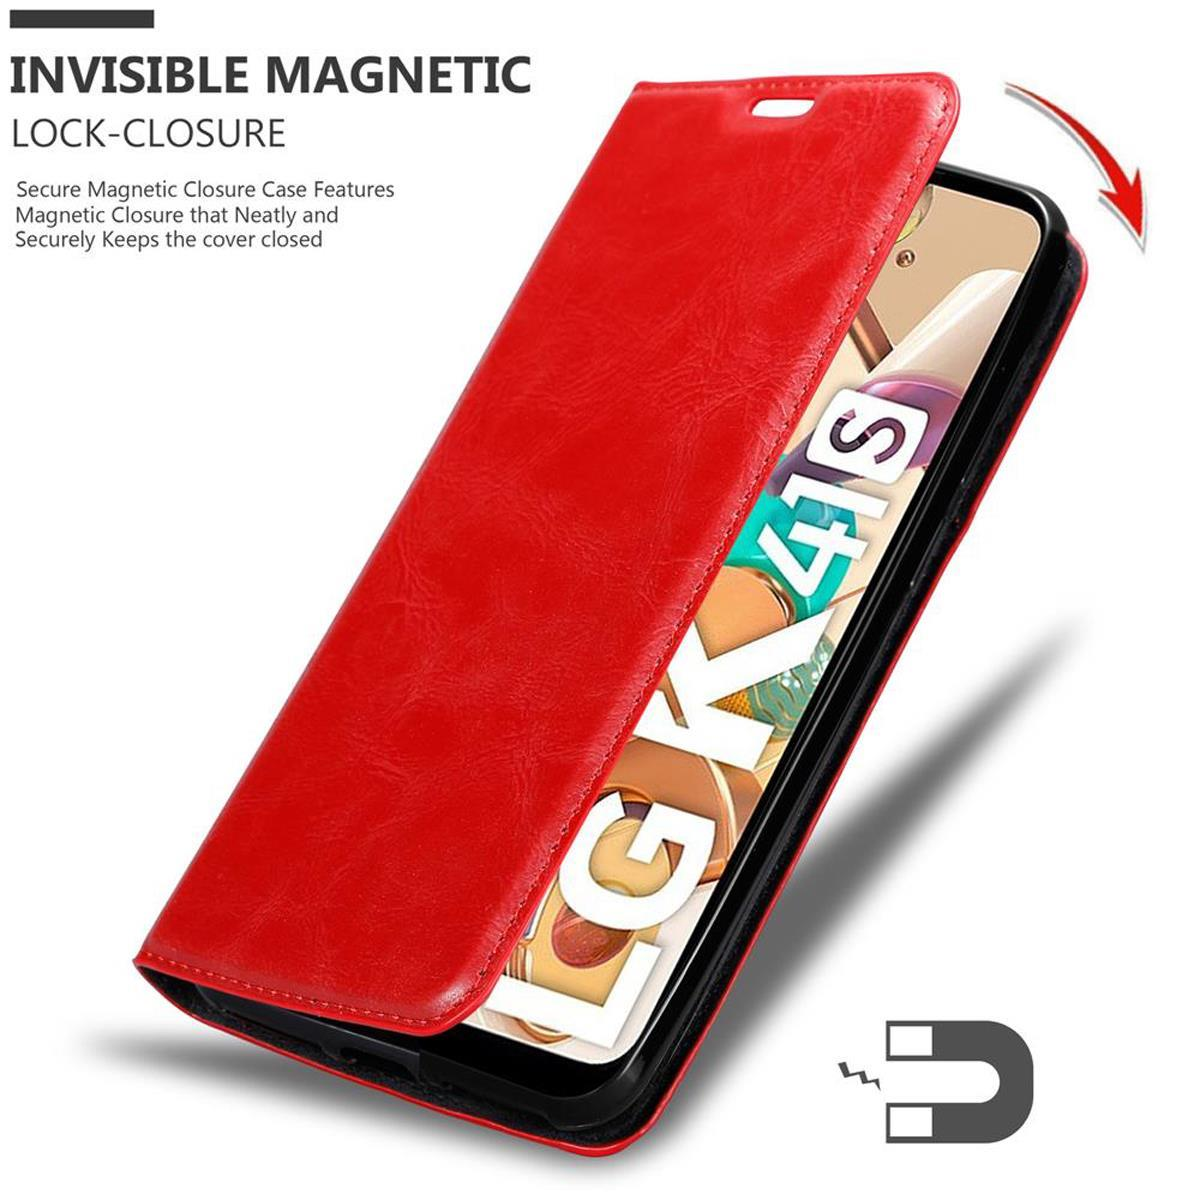 Hülle Book Invisible ROT Magnet, Bookcover, LG, APFEL CADORABO KQ51,